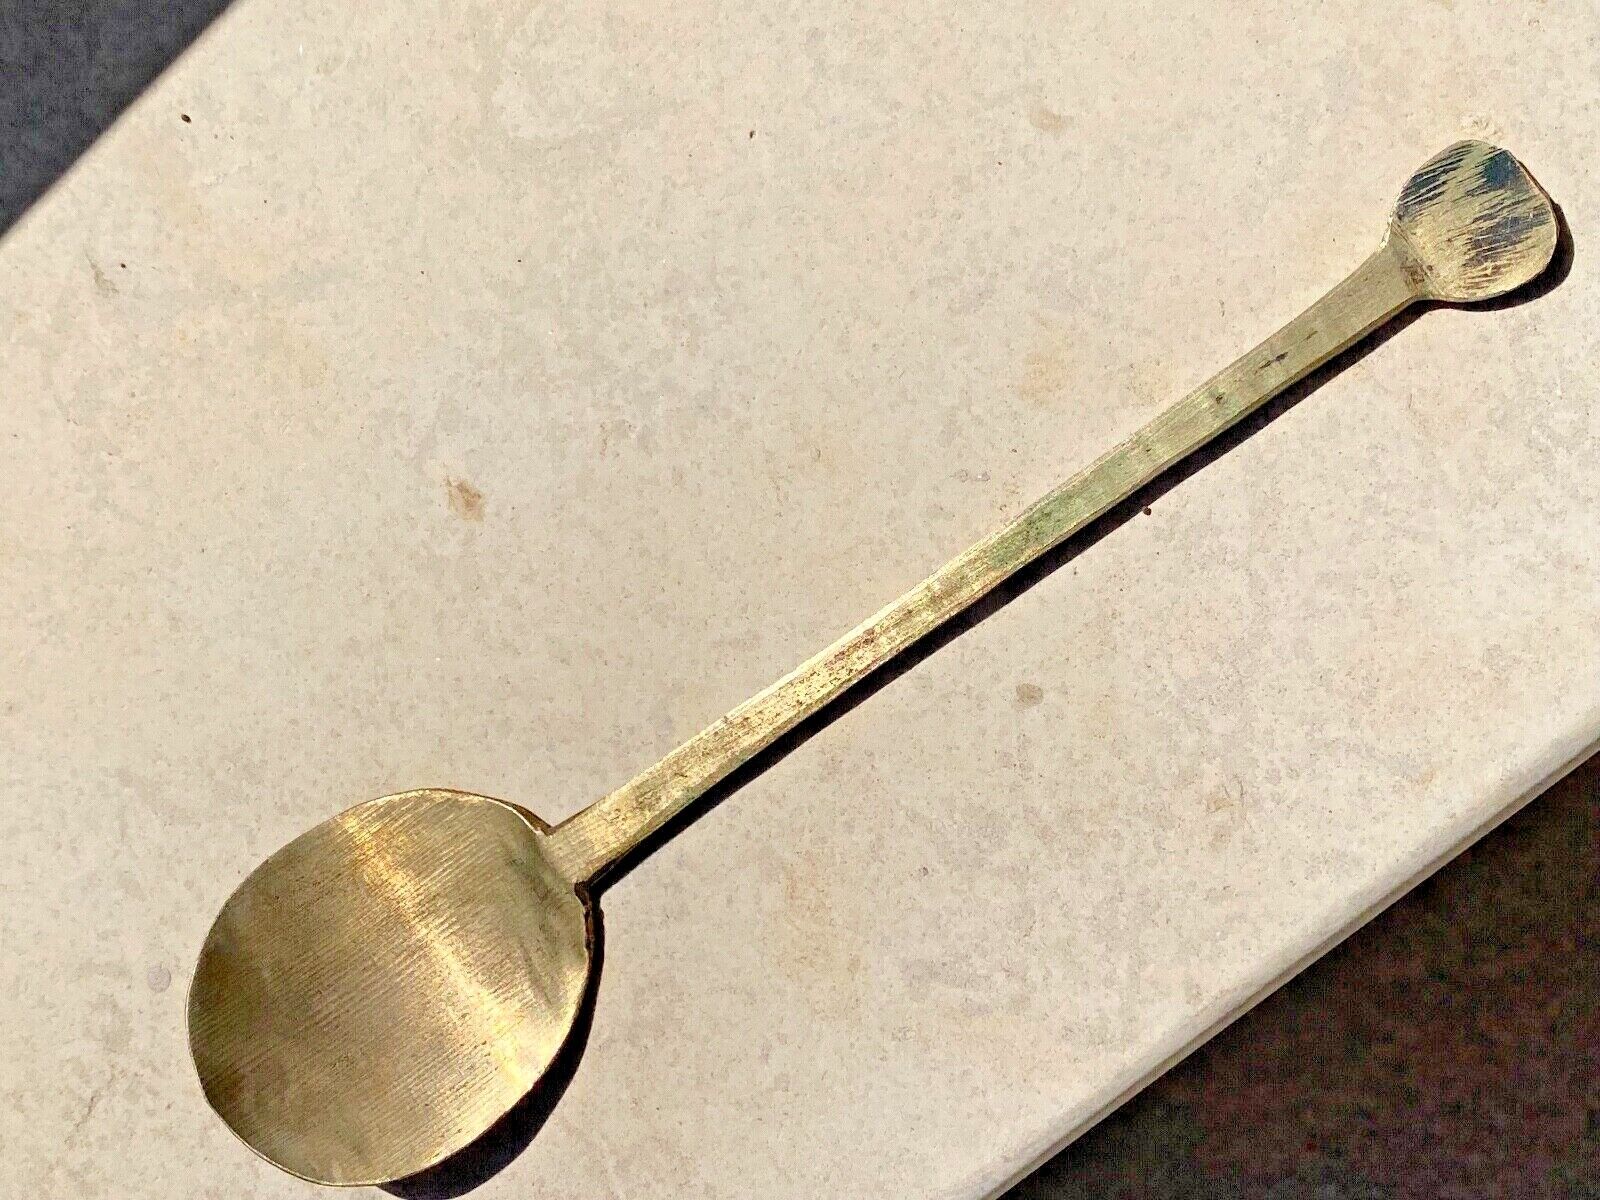 Antique Pharmaceutical Mixing Powder Measure Spoon Scoop Pharmacy Apothecary Rx